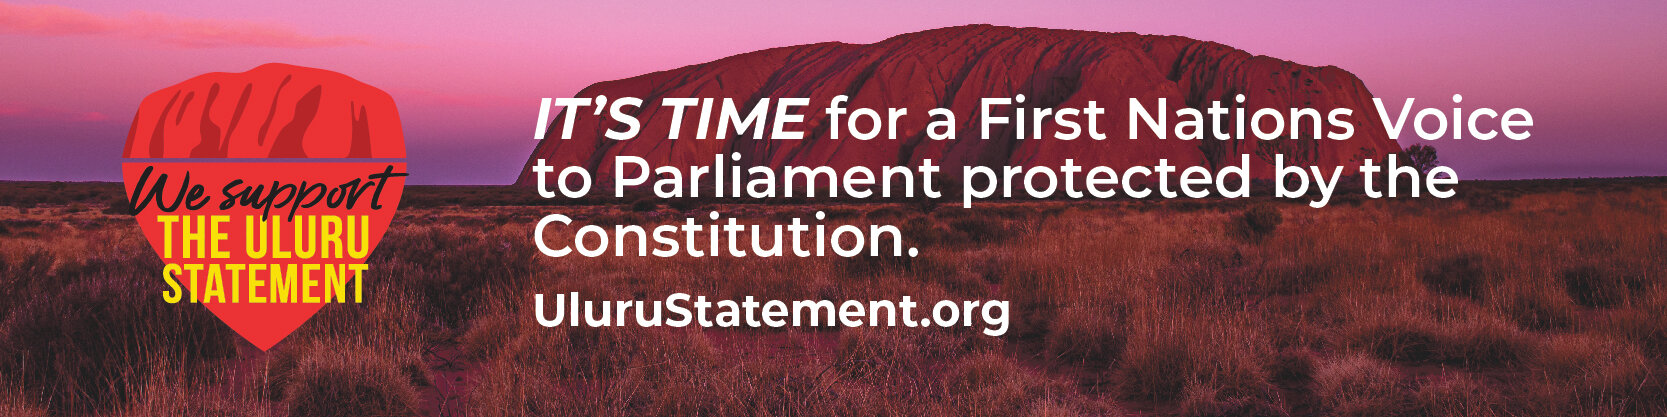 IT'S TIME for a First Nations Voice to Parliament protected by the Constitution